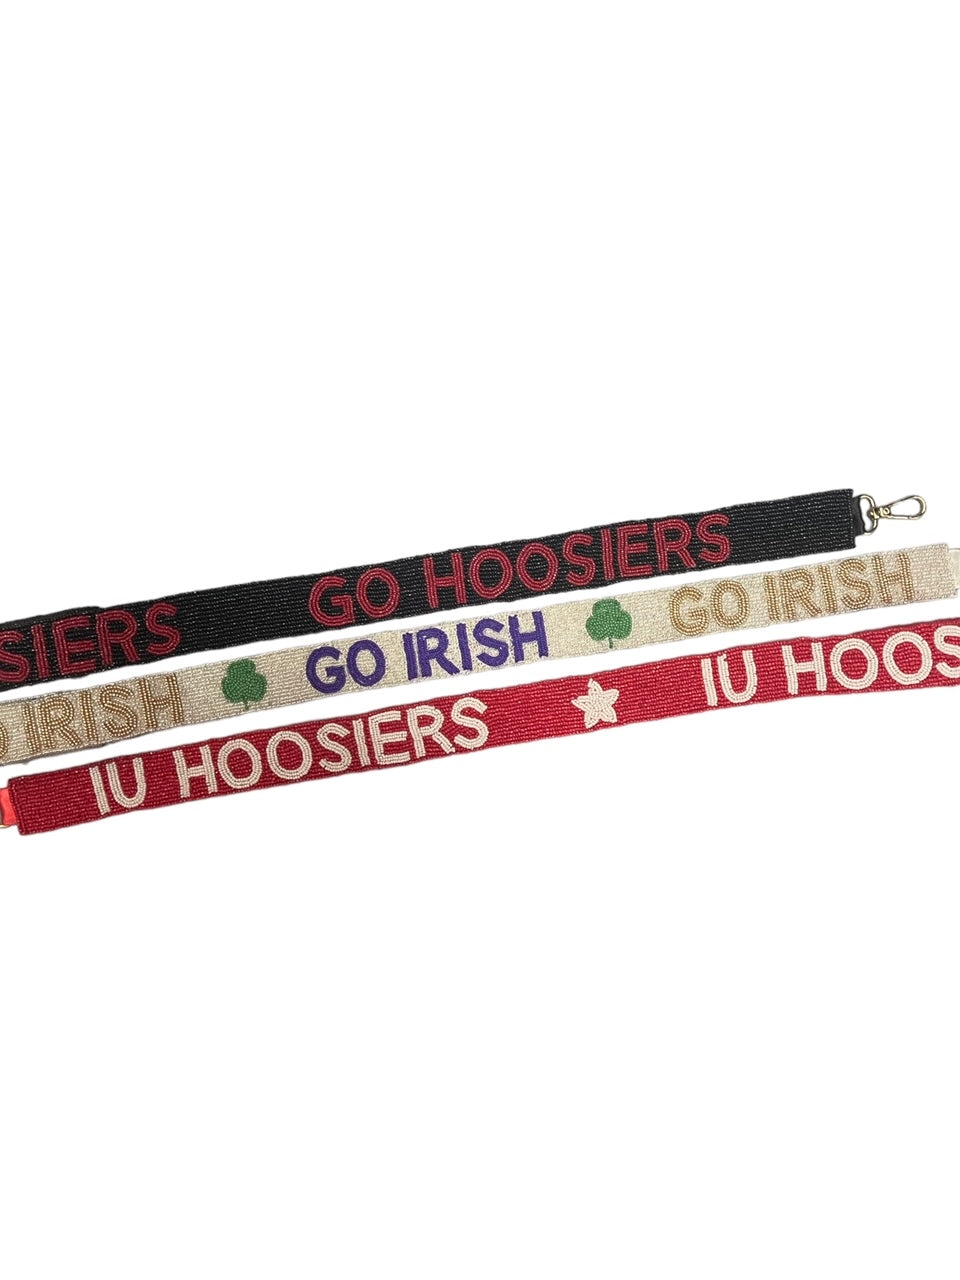 Game Day, Beaded Bag Strap, Clear Bag Strap, Football Strap